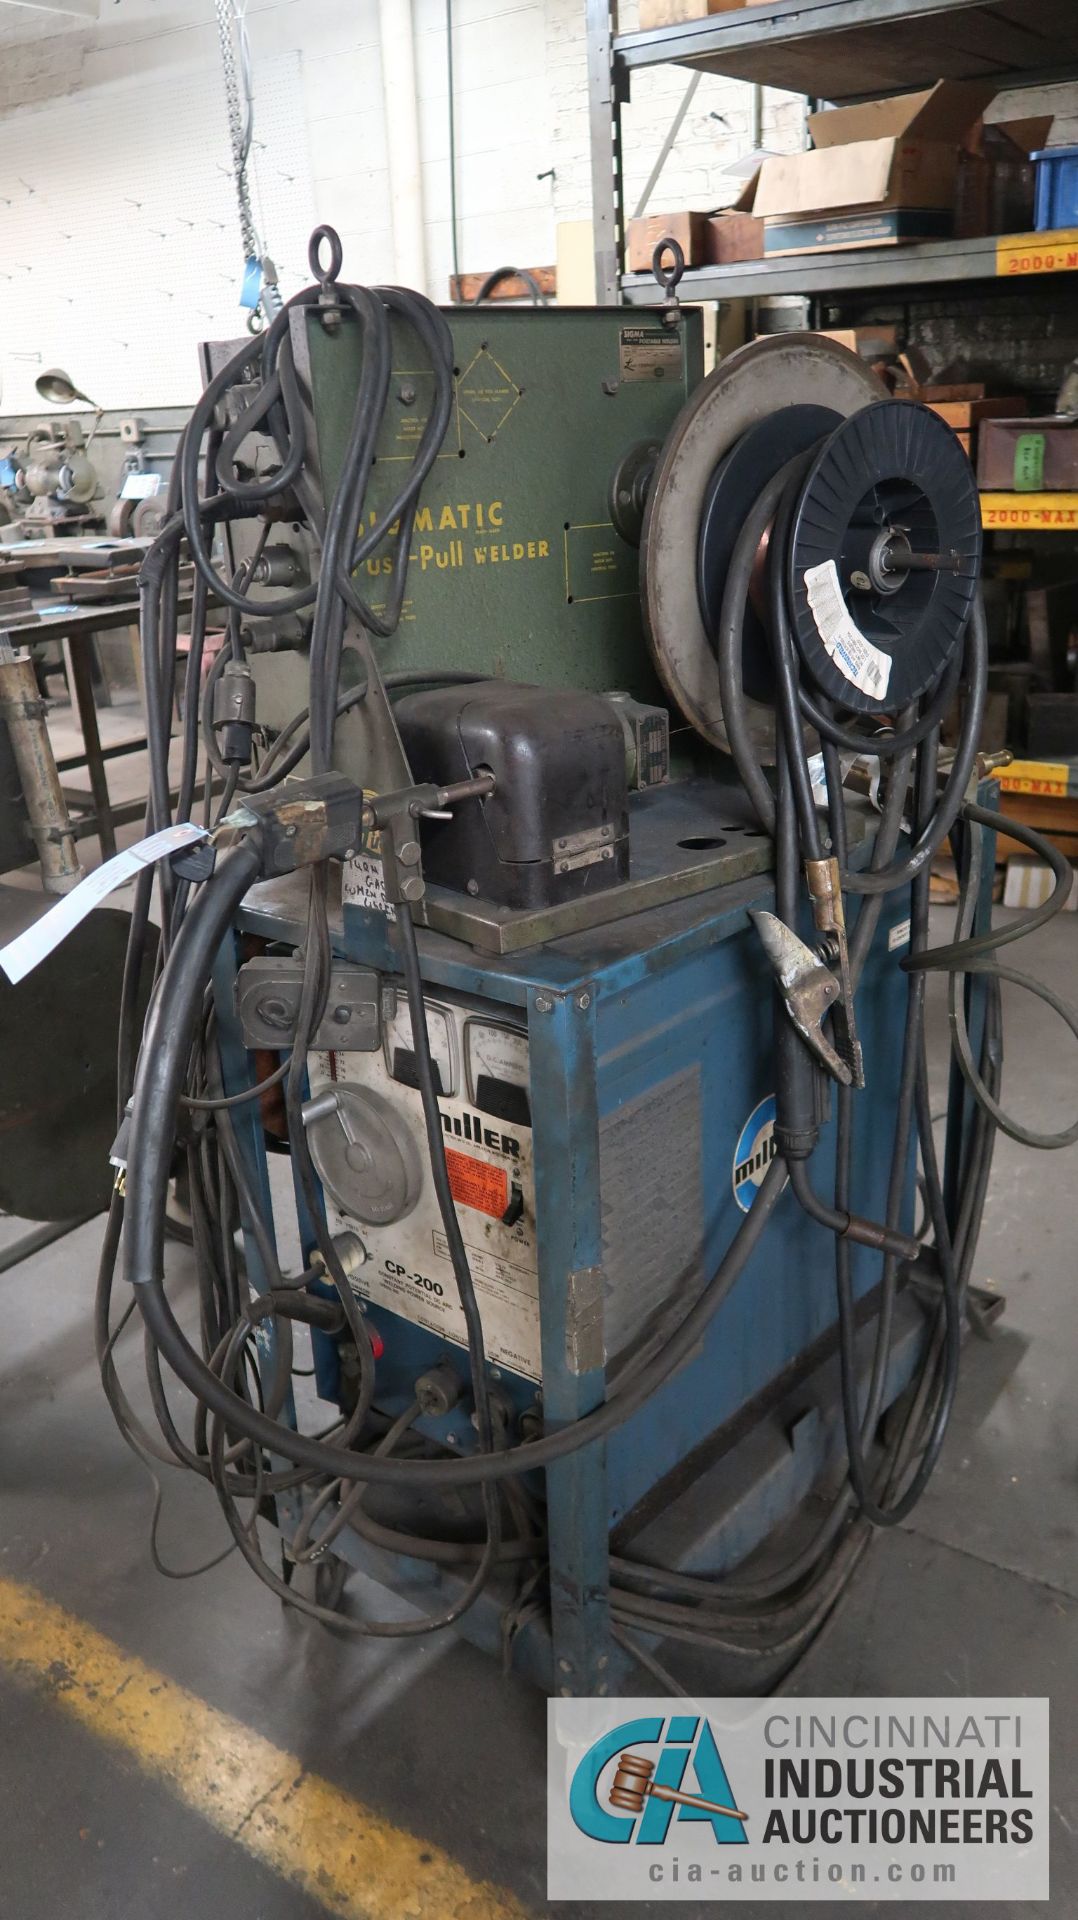 200 AMP MILLER CP-200 WELDER W/ LINDE SIGMATIC PUSH-PULL WIRE FEEDER - Image 4 of 5